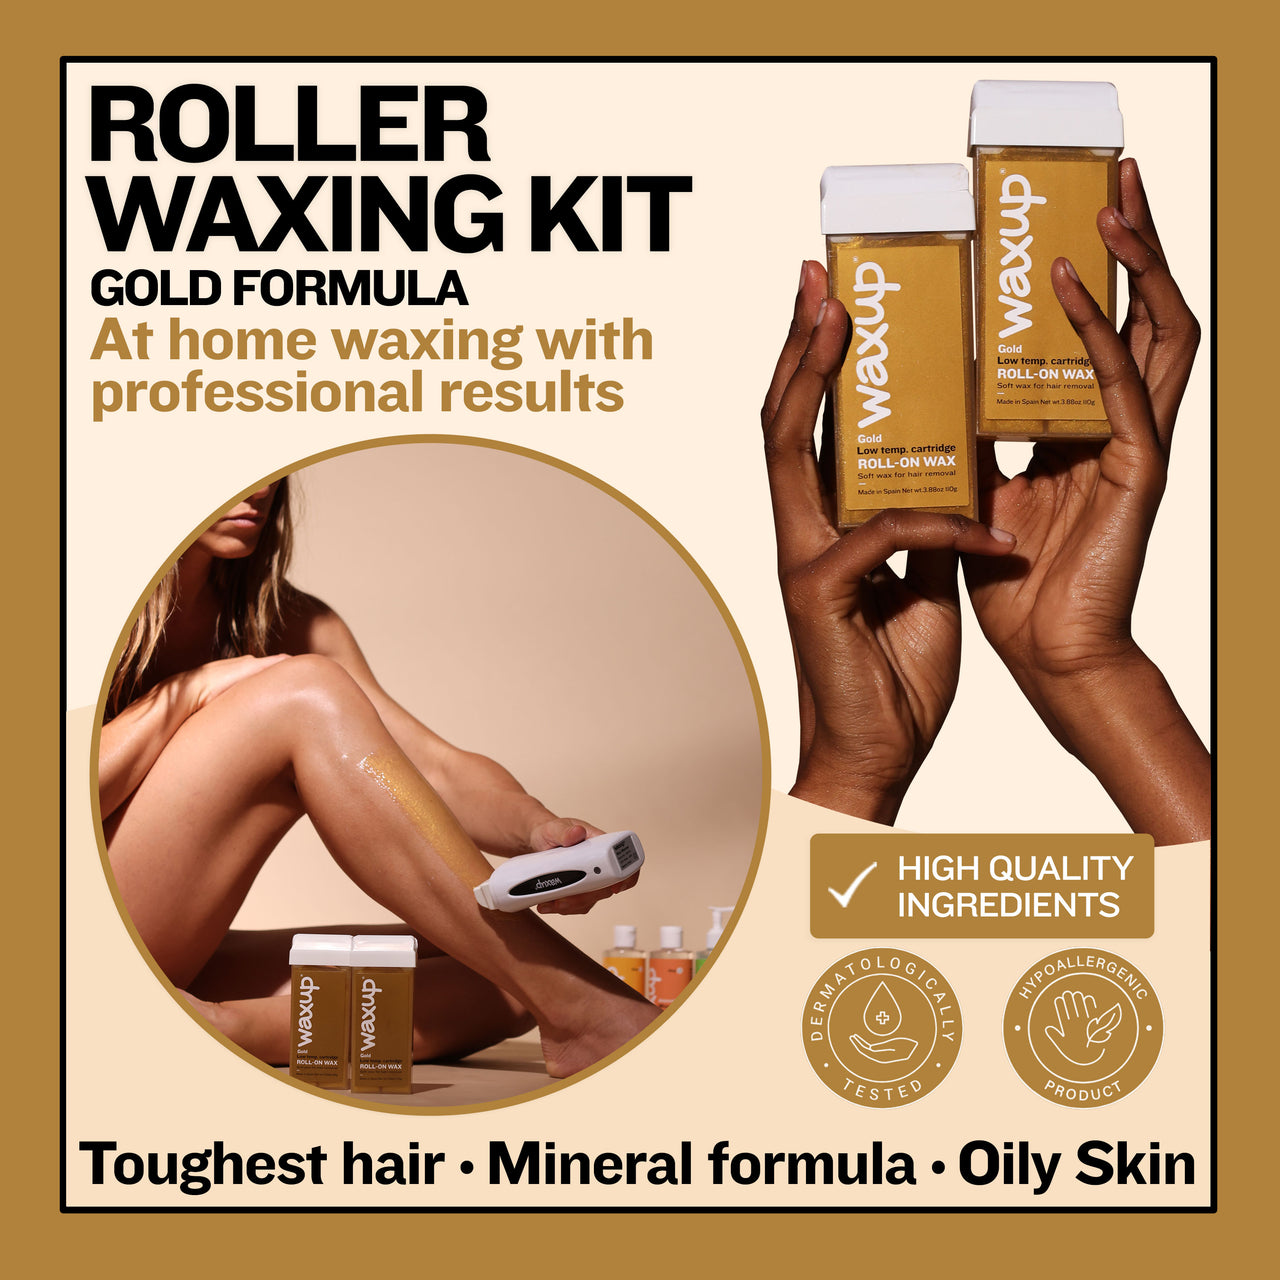 Elite Gold Roller Waxing Kit - thatswaxup -  - Roller Waxing Kit - waxup hair removal wax body waxing kit women and men professional waxing supplies